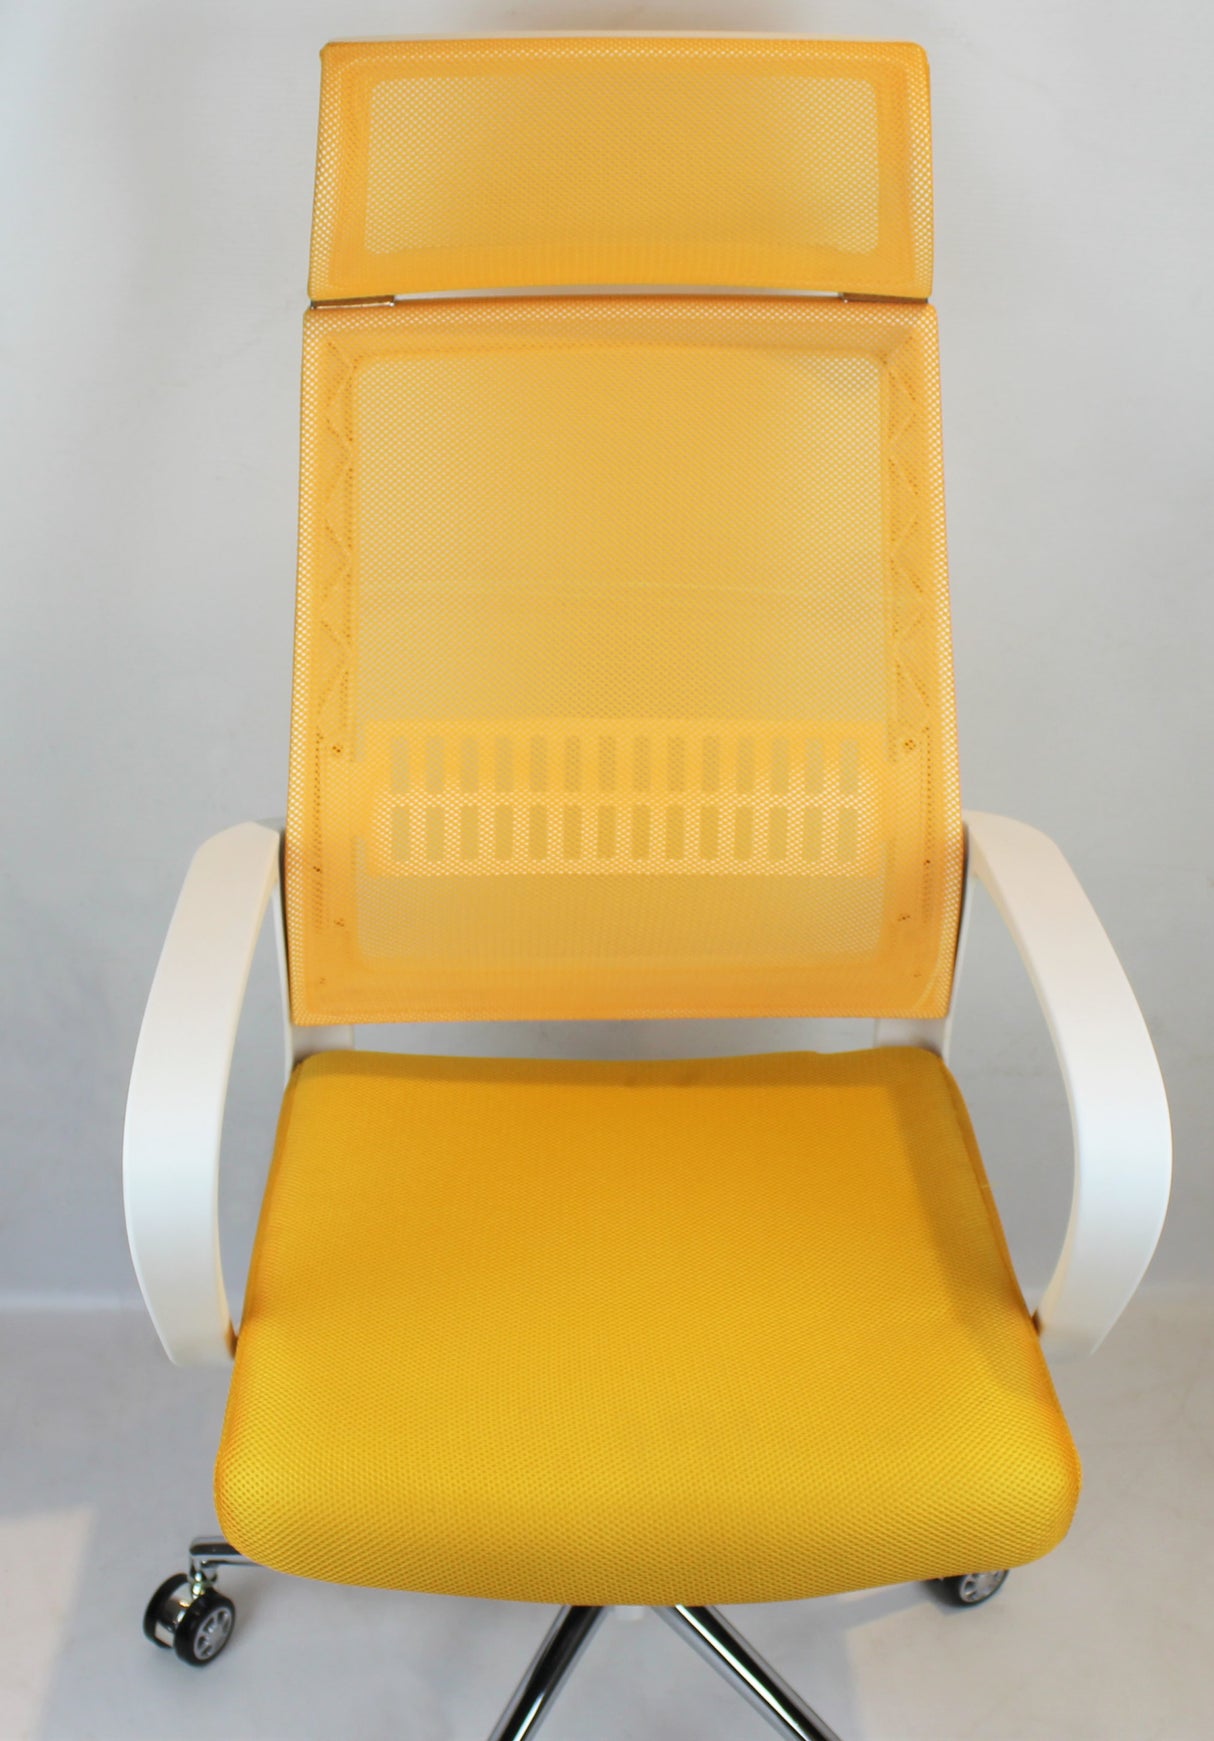 Modern Office Chair with Yellow Mesh - DH-086